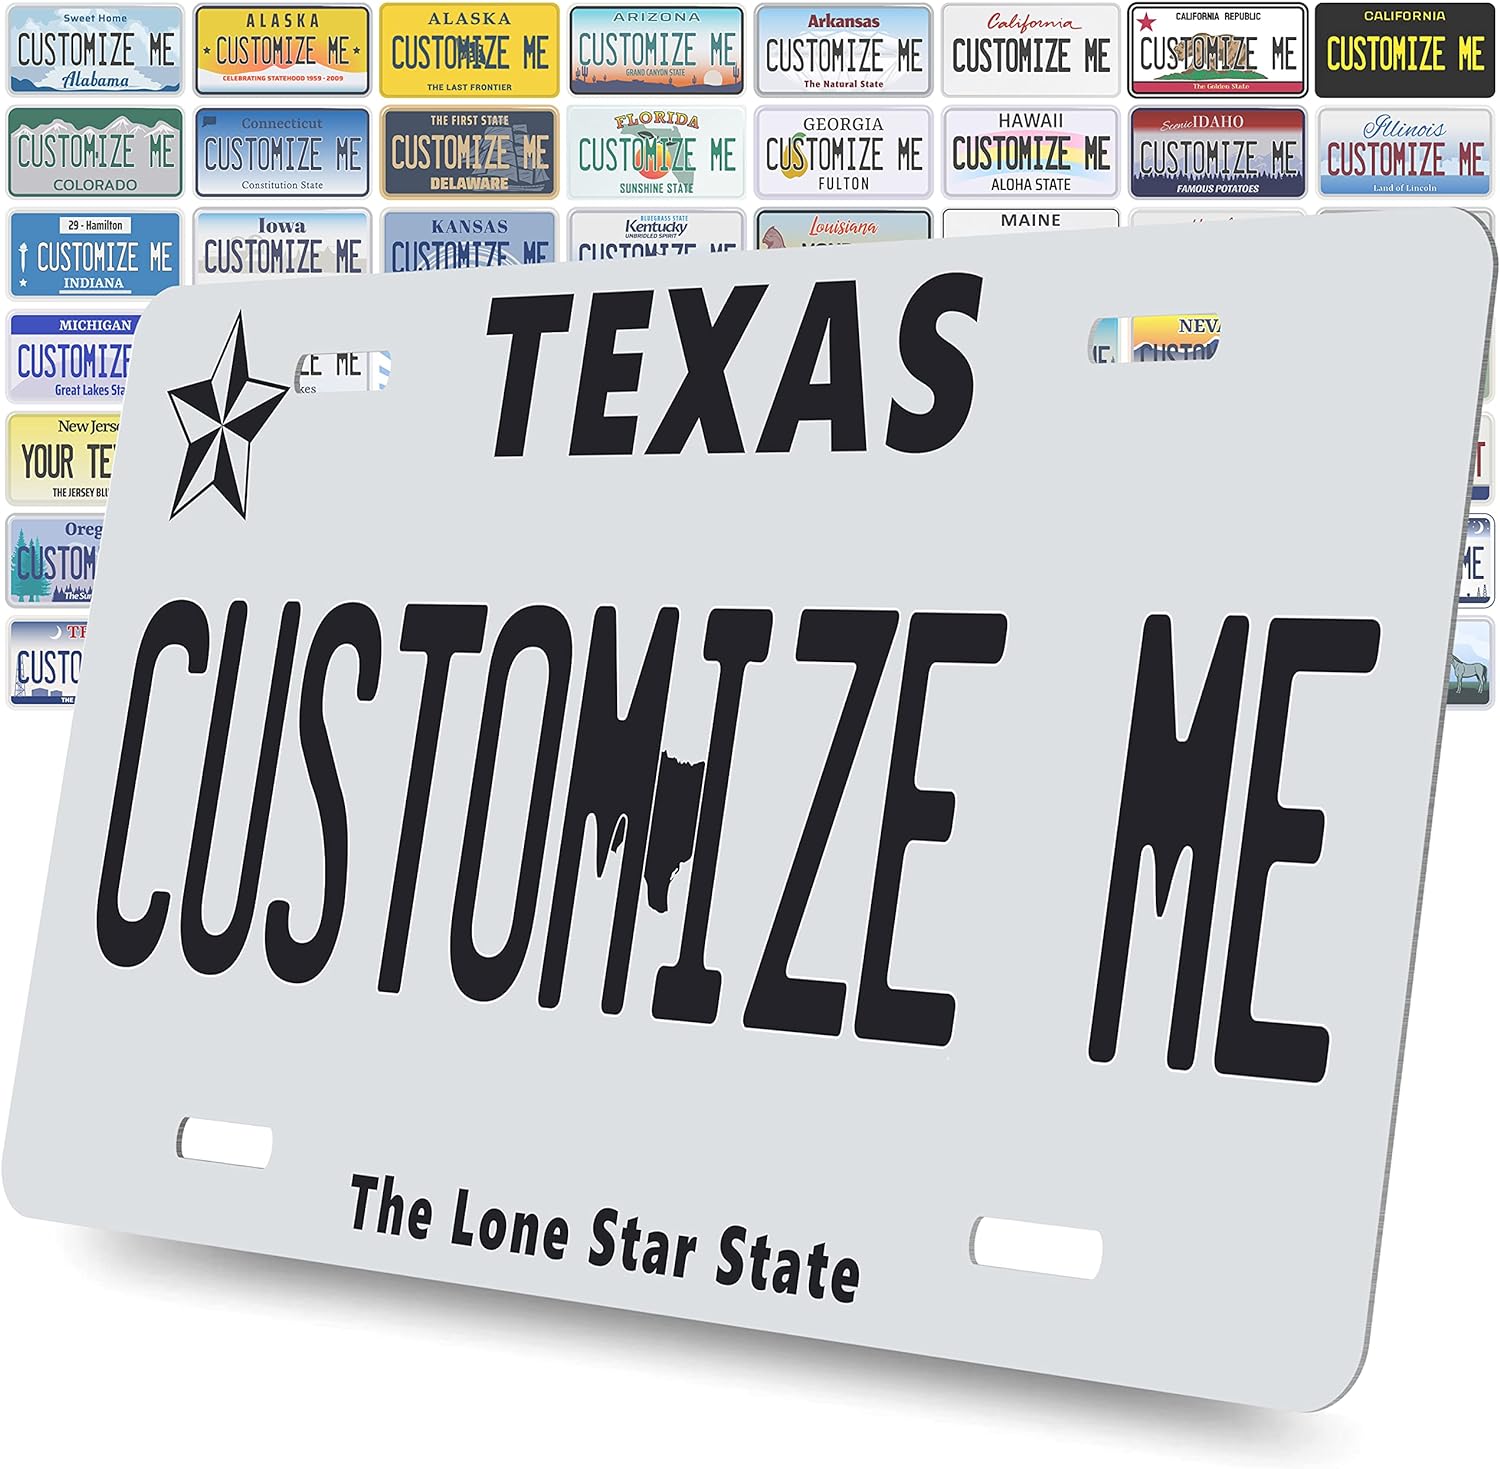 Brd Gifts Custom State License Plate - 6x3 - 50 States | Personalized Texas State License Plate with Your Name, Text - UV Protected Kids